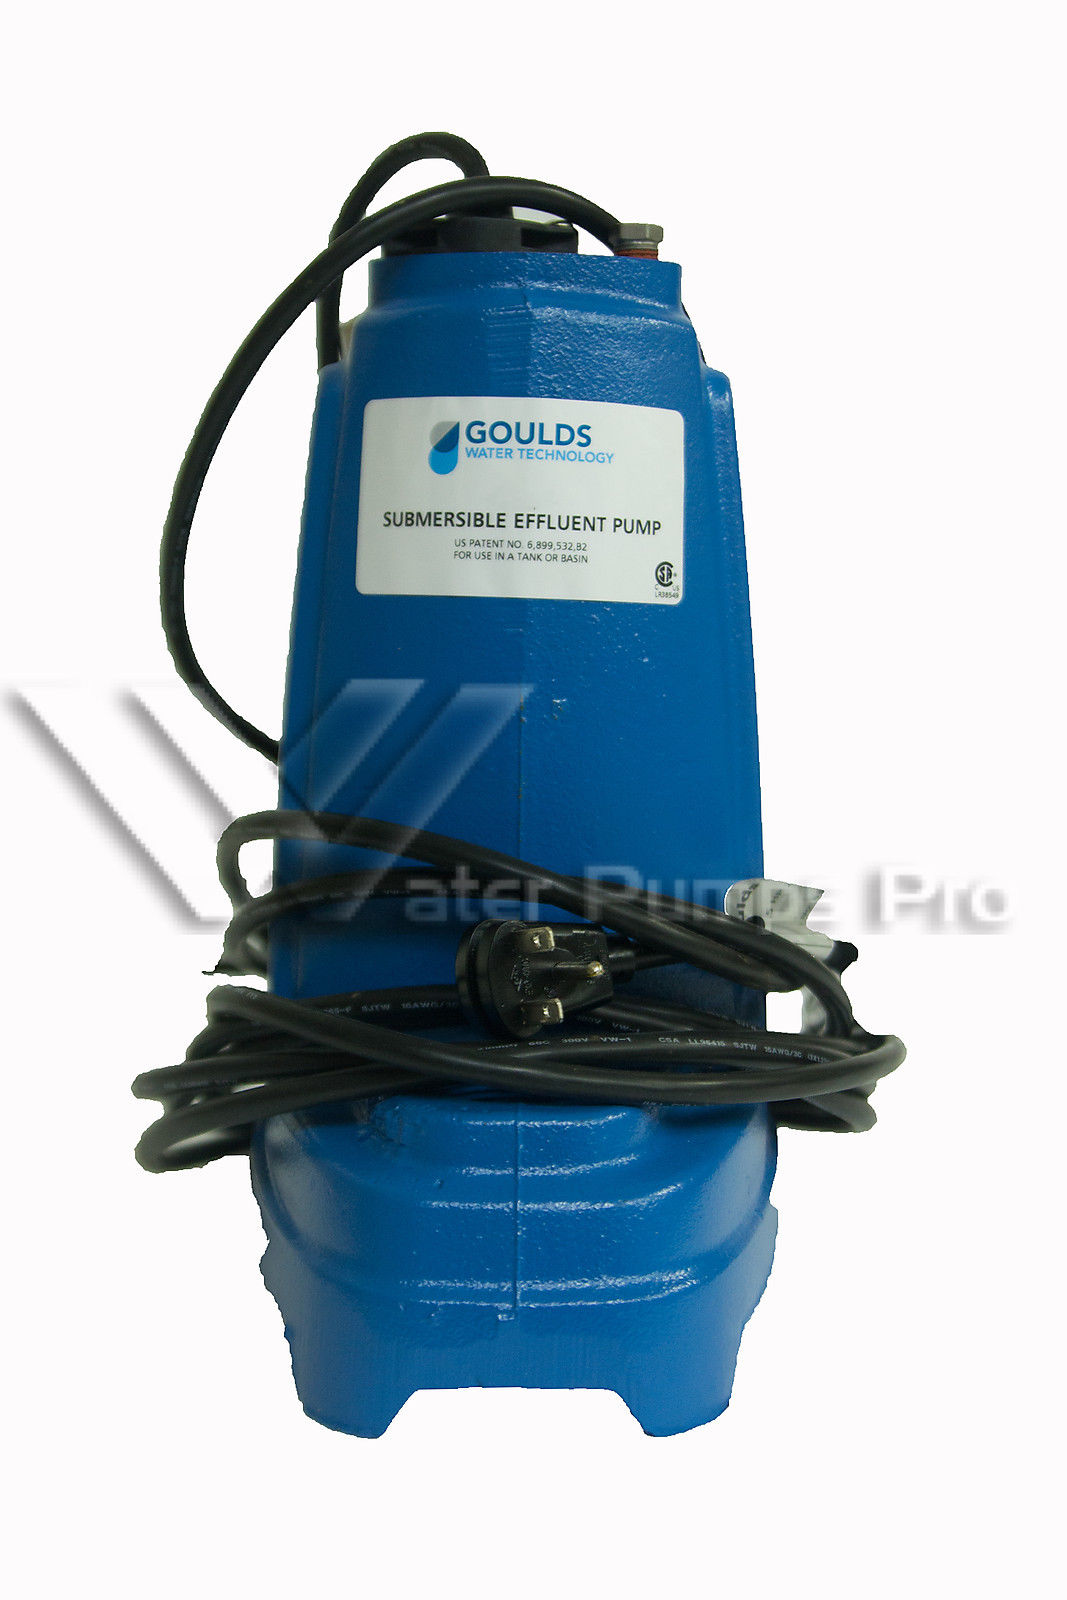 Goulds PE31M 1/3 HP, 115V Submersible Effluent Pump - Click Image to Close